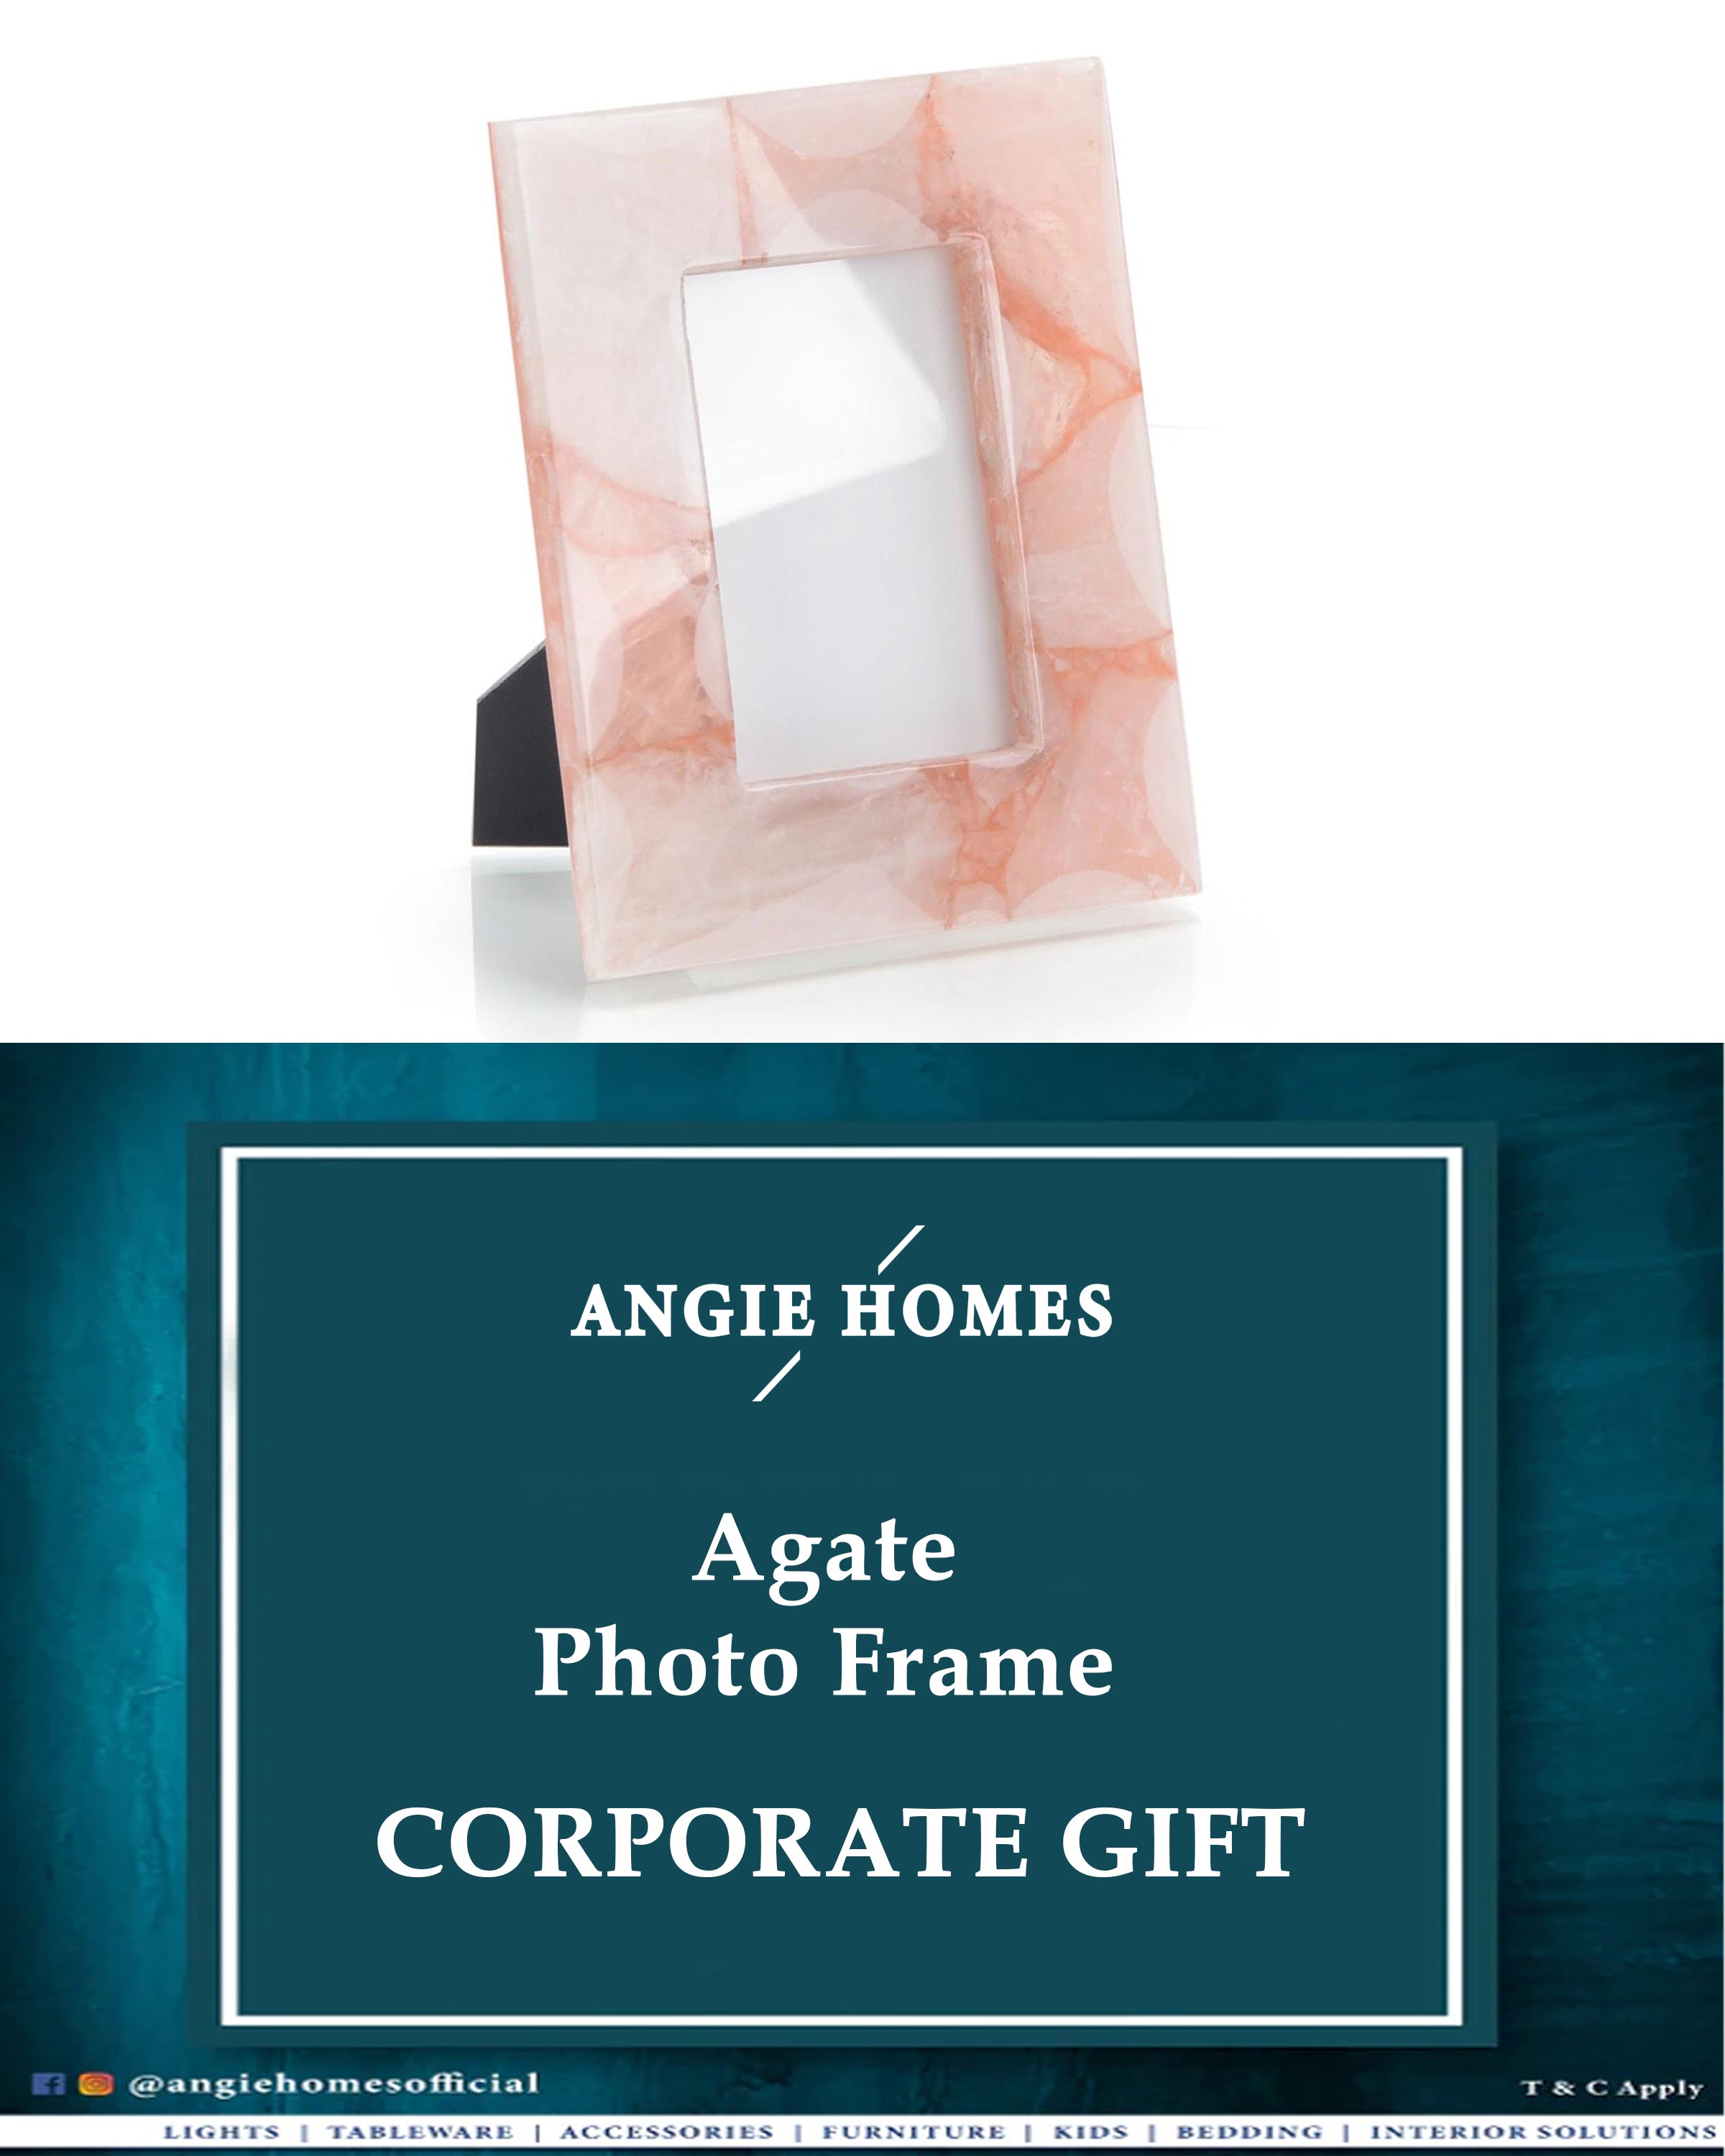 Agate Photo Frame for Weddings, House Warming & Corporate Gift ANGIE HOMES